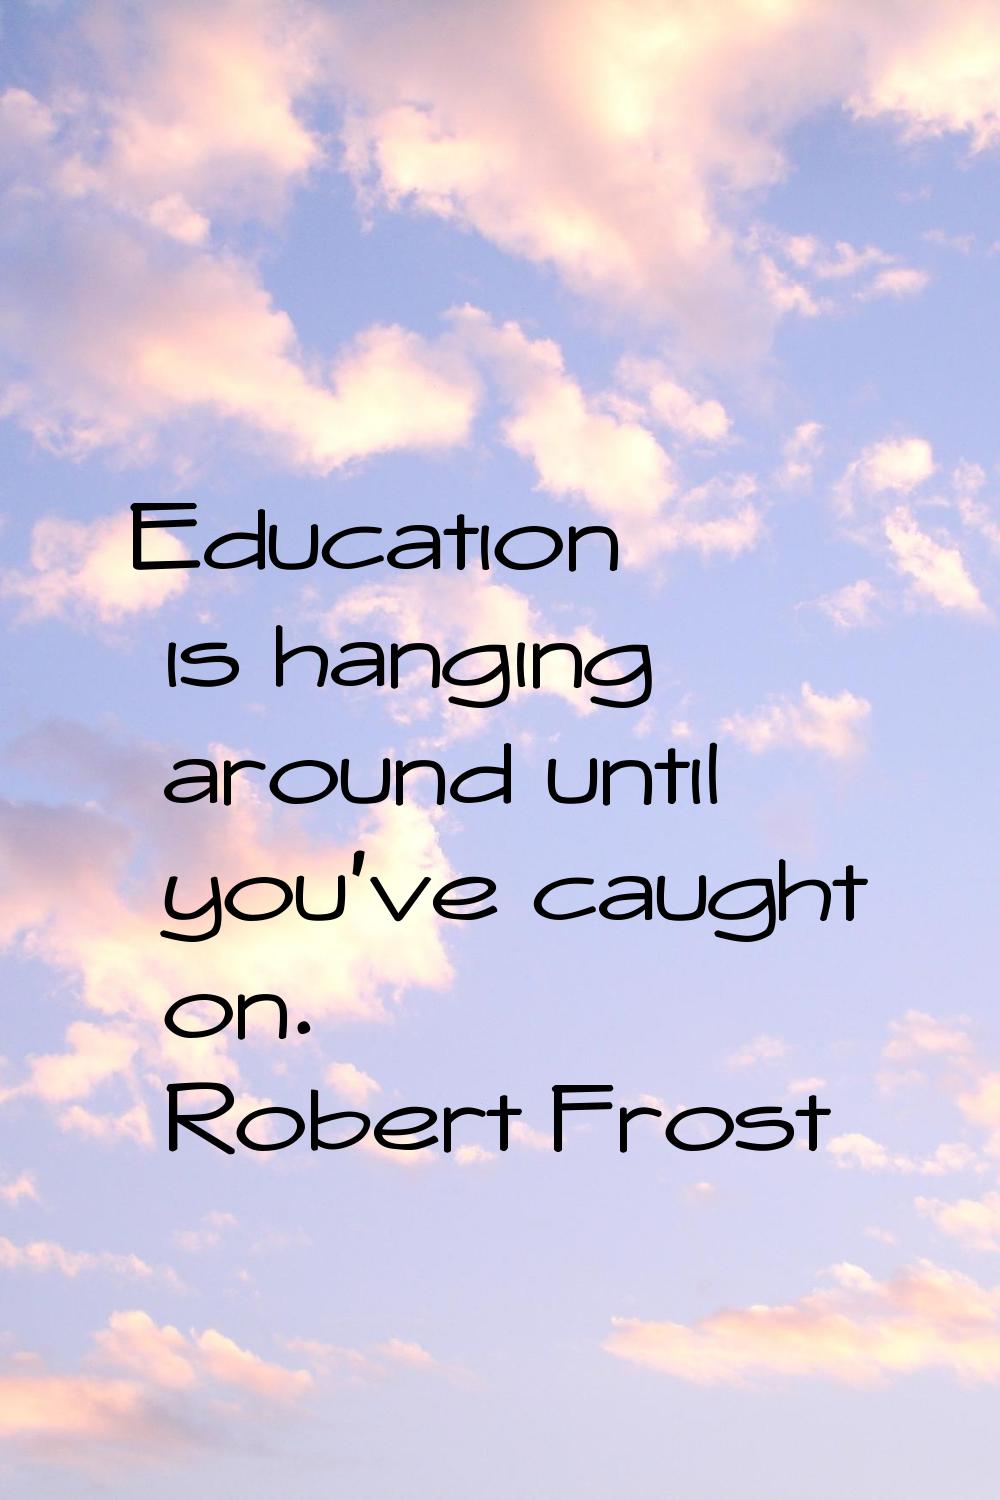 Education is hanging around until you've caught on.